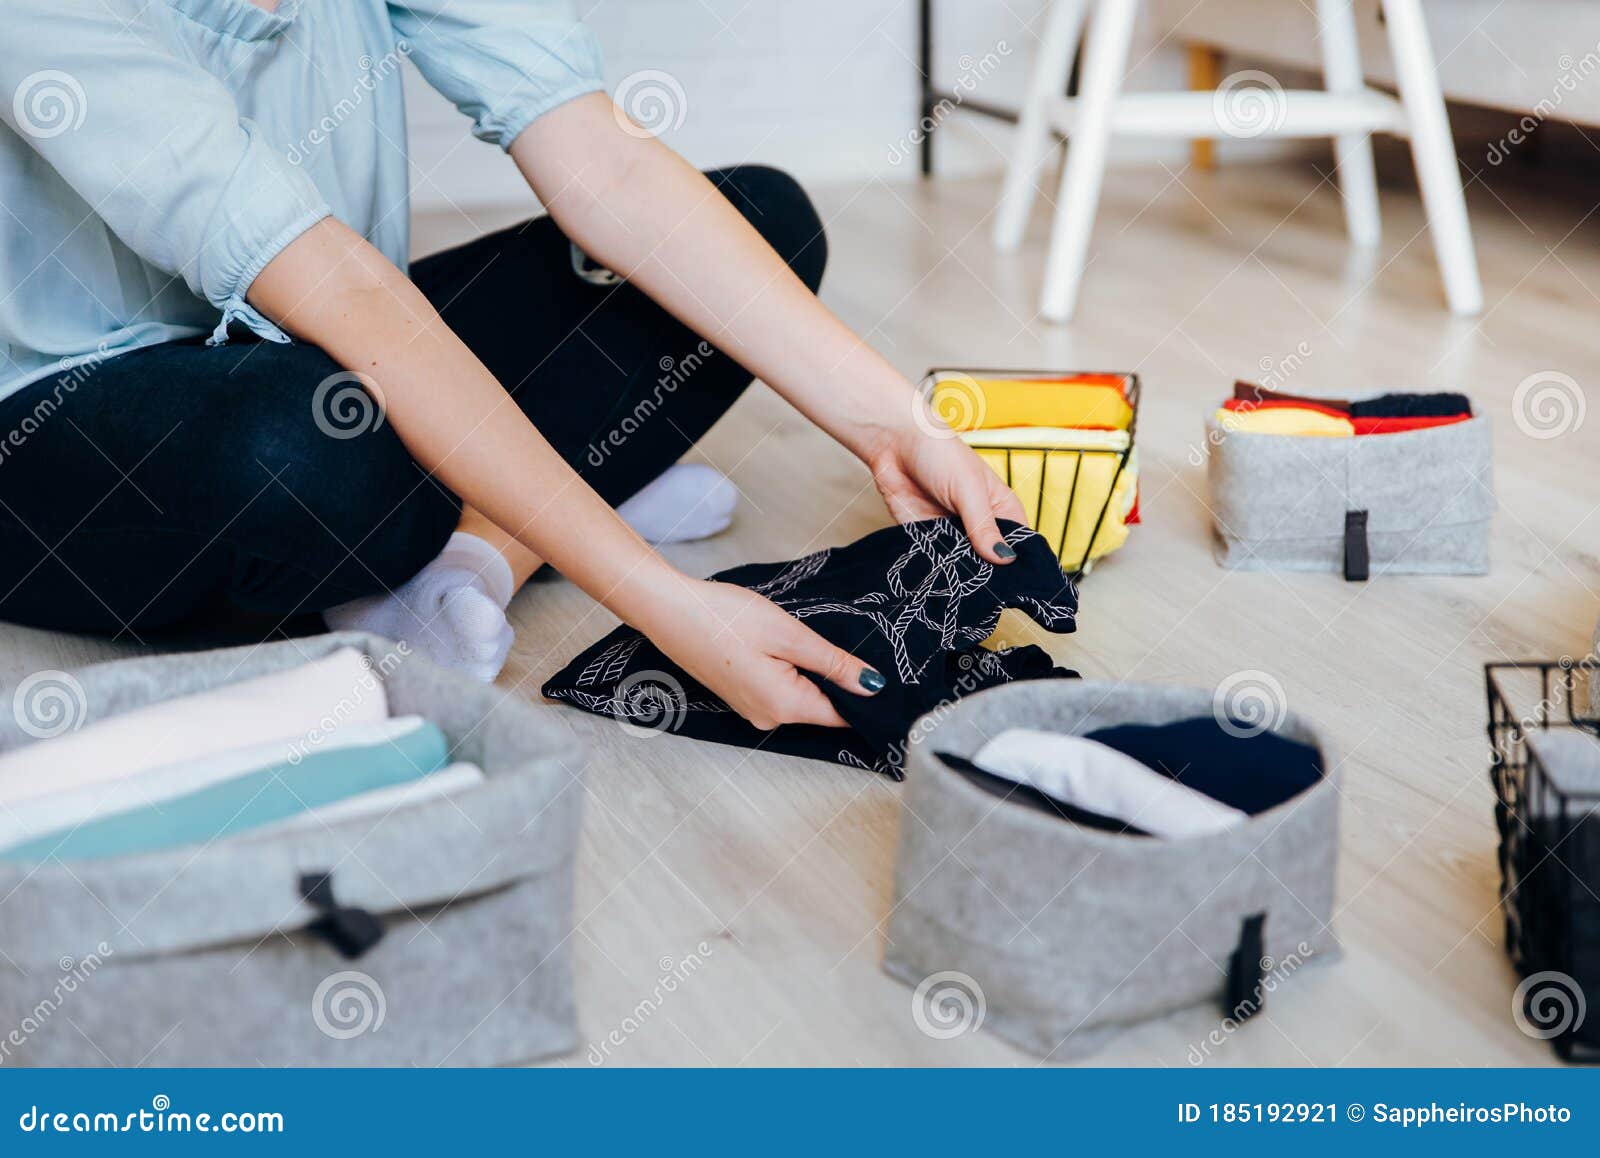 woman folding clothes on the floor, organizing stuff and laundry